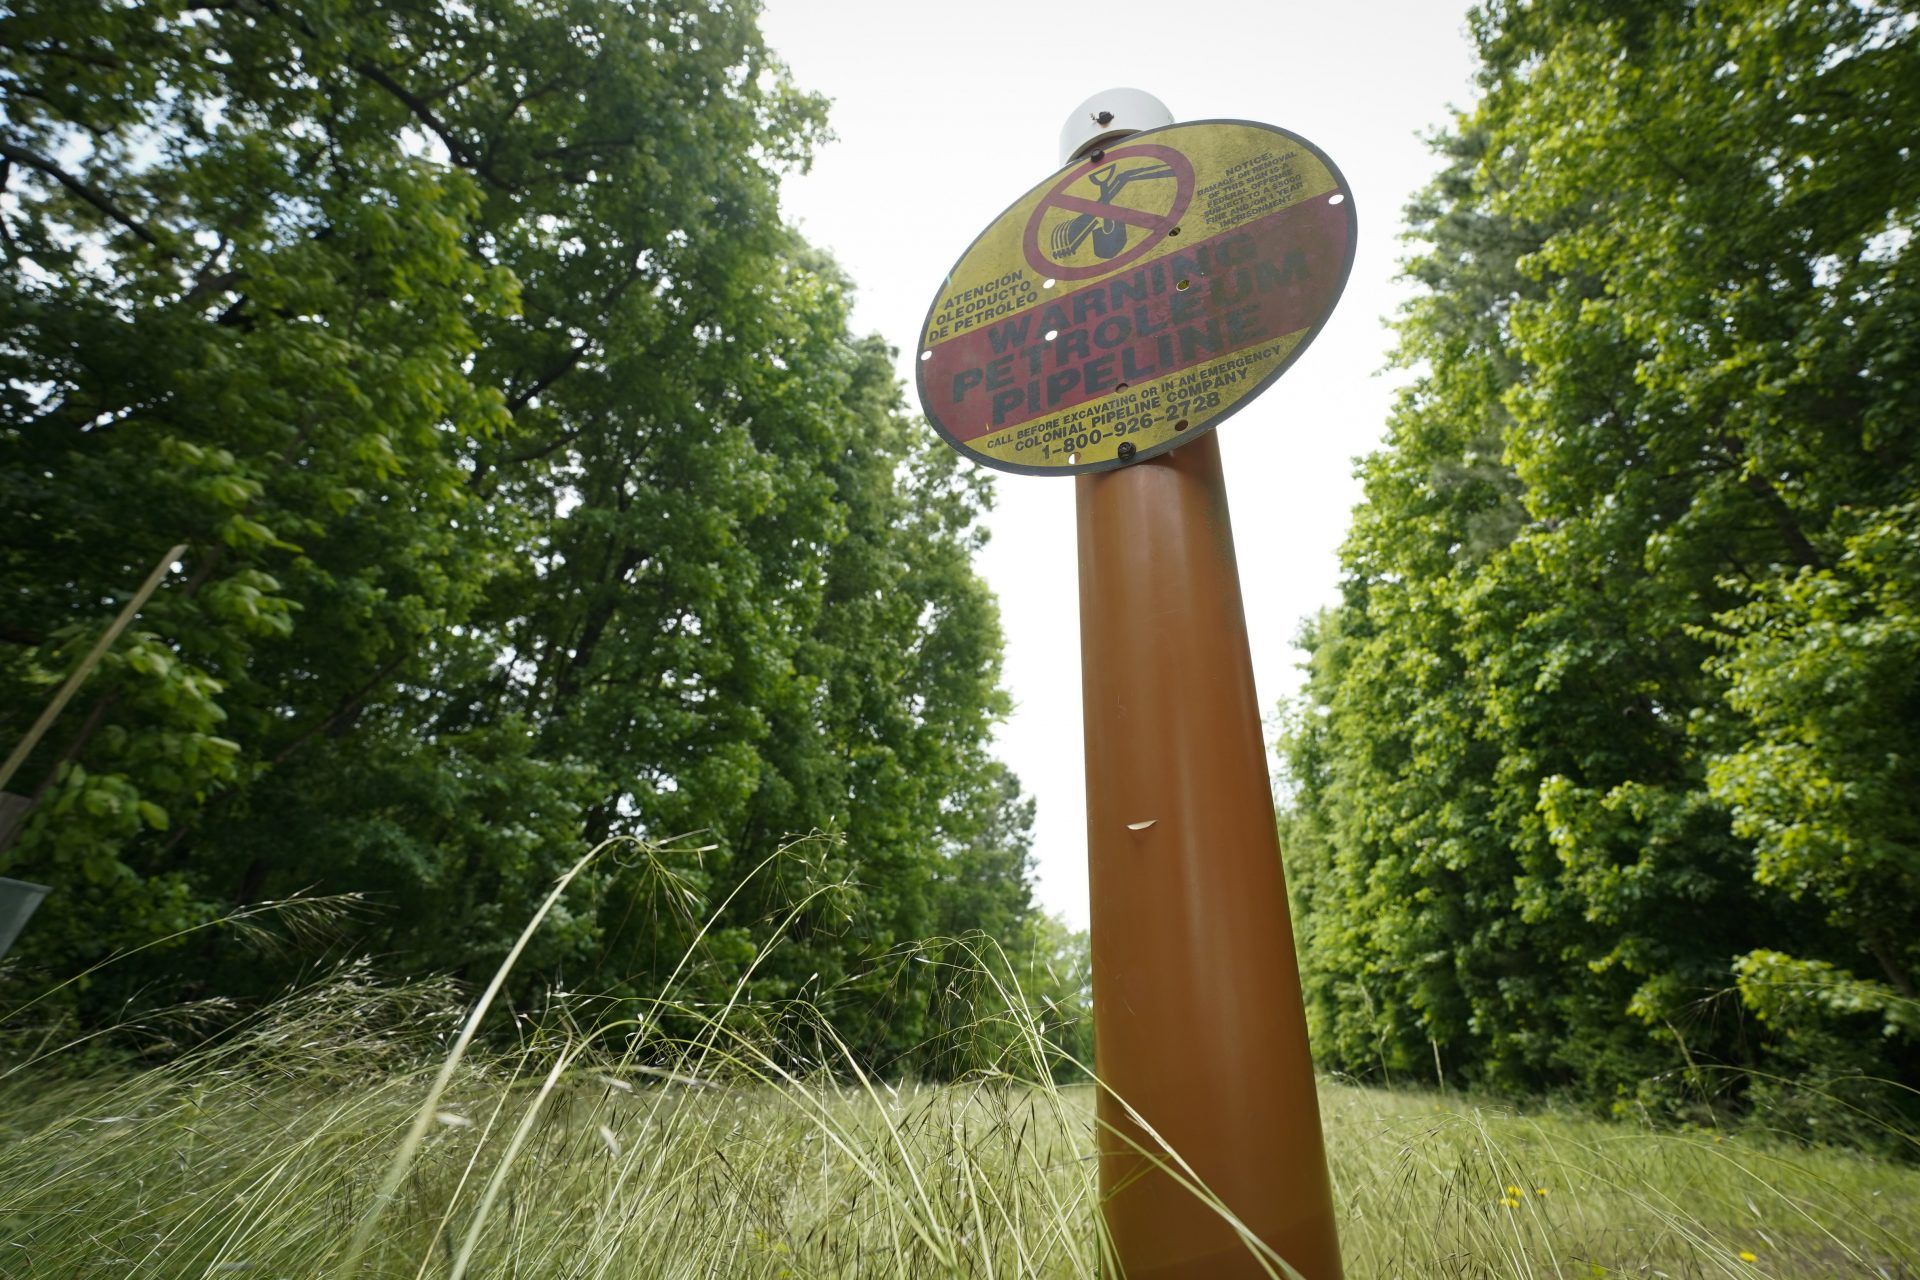 A sign marking the location of the Colonial Pipeline is posted on Tuesday, May 11, 2021, in Charlotte, N.C.